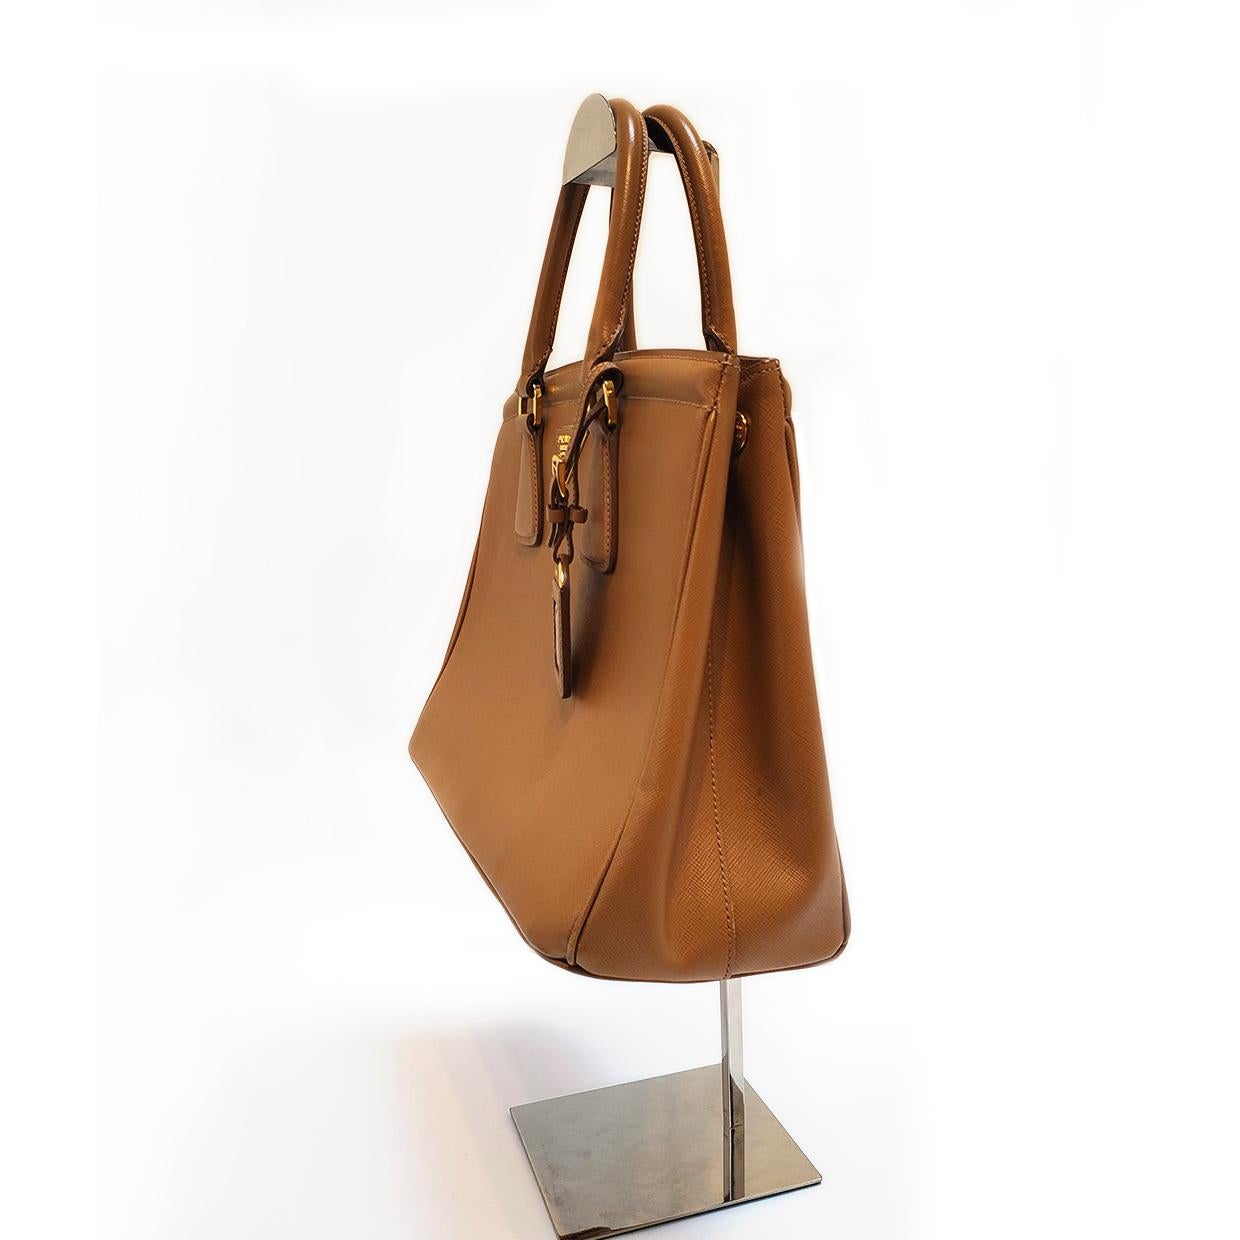 Brand - Prada
Collection - Saffiano Parabole
Estimated Retail - $2,350.00
Style - Tote
Material - Leather
Color - Caramel
Closure - Zip
Hardware Material - Goldtone
Comes With - Dustbag
Size - Large
Feature - Inner Dividers
Accent - Luggage